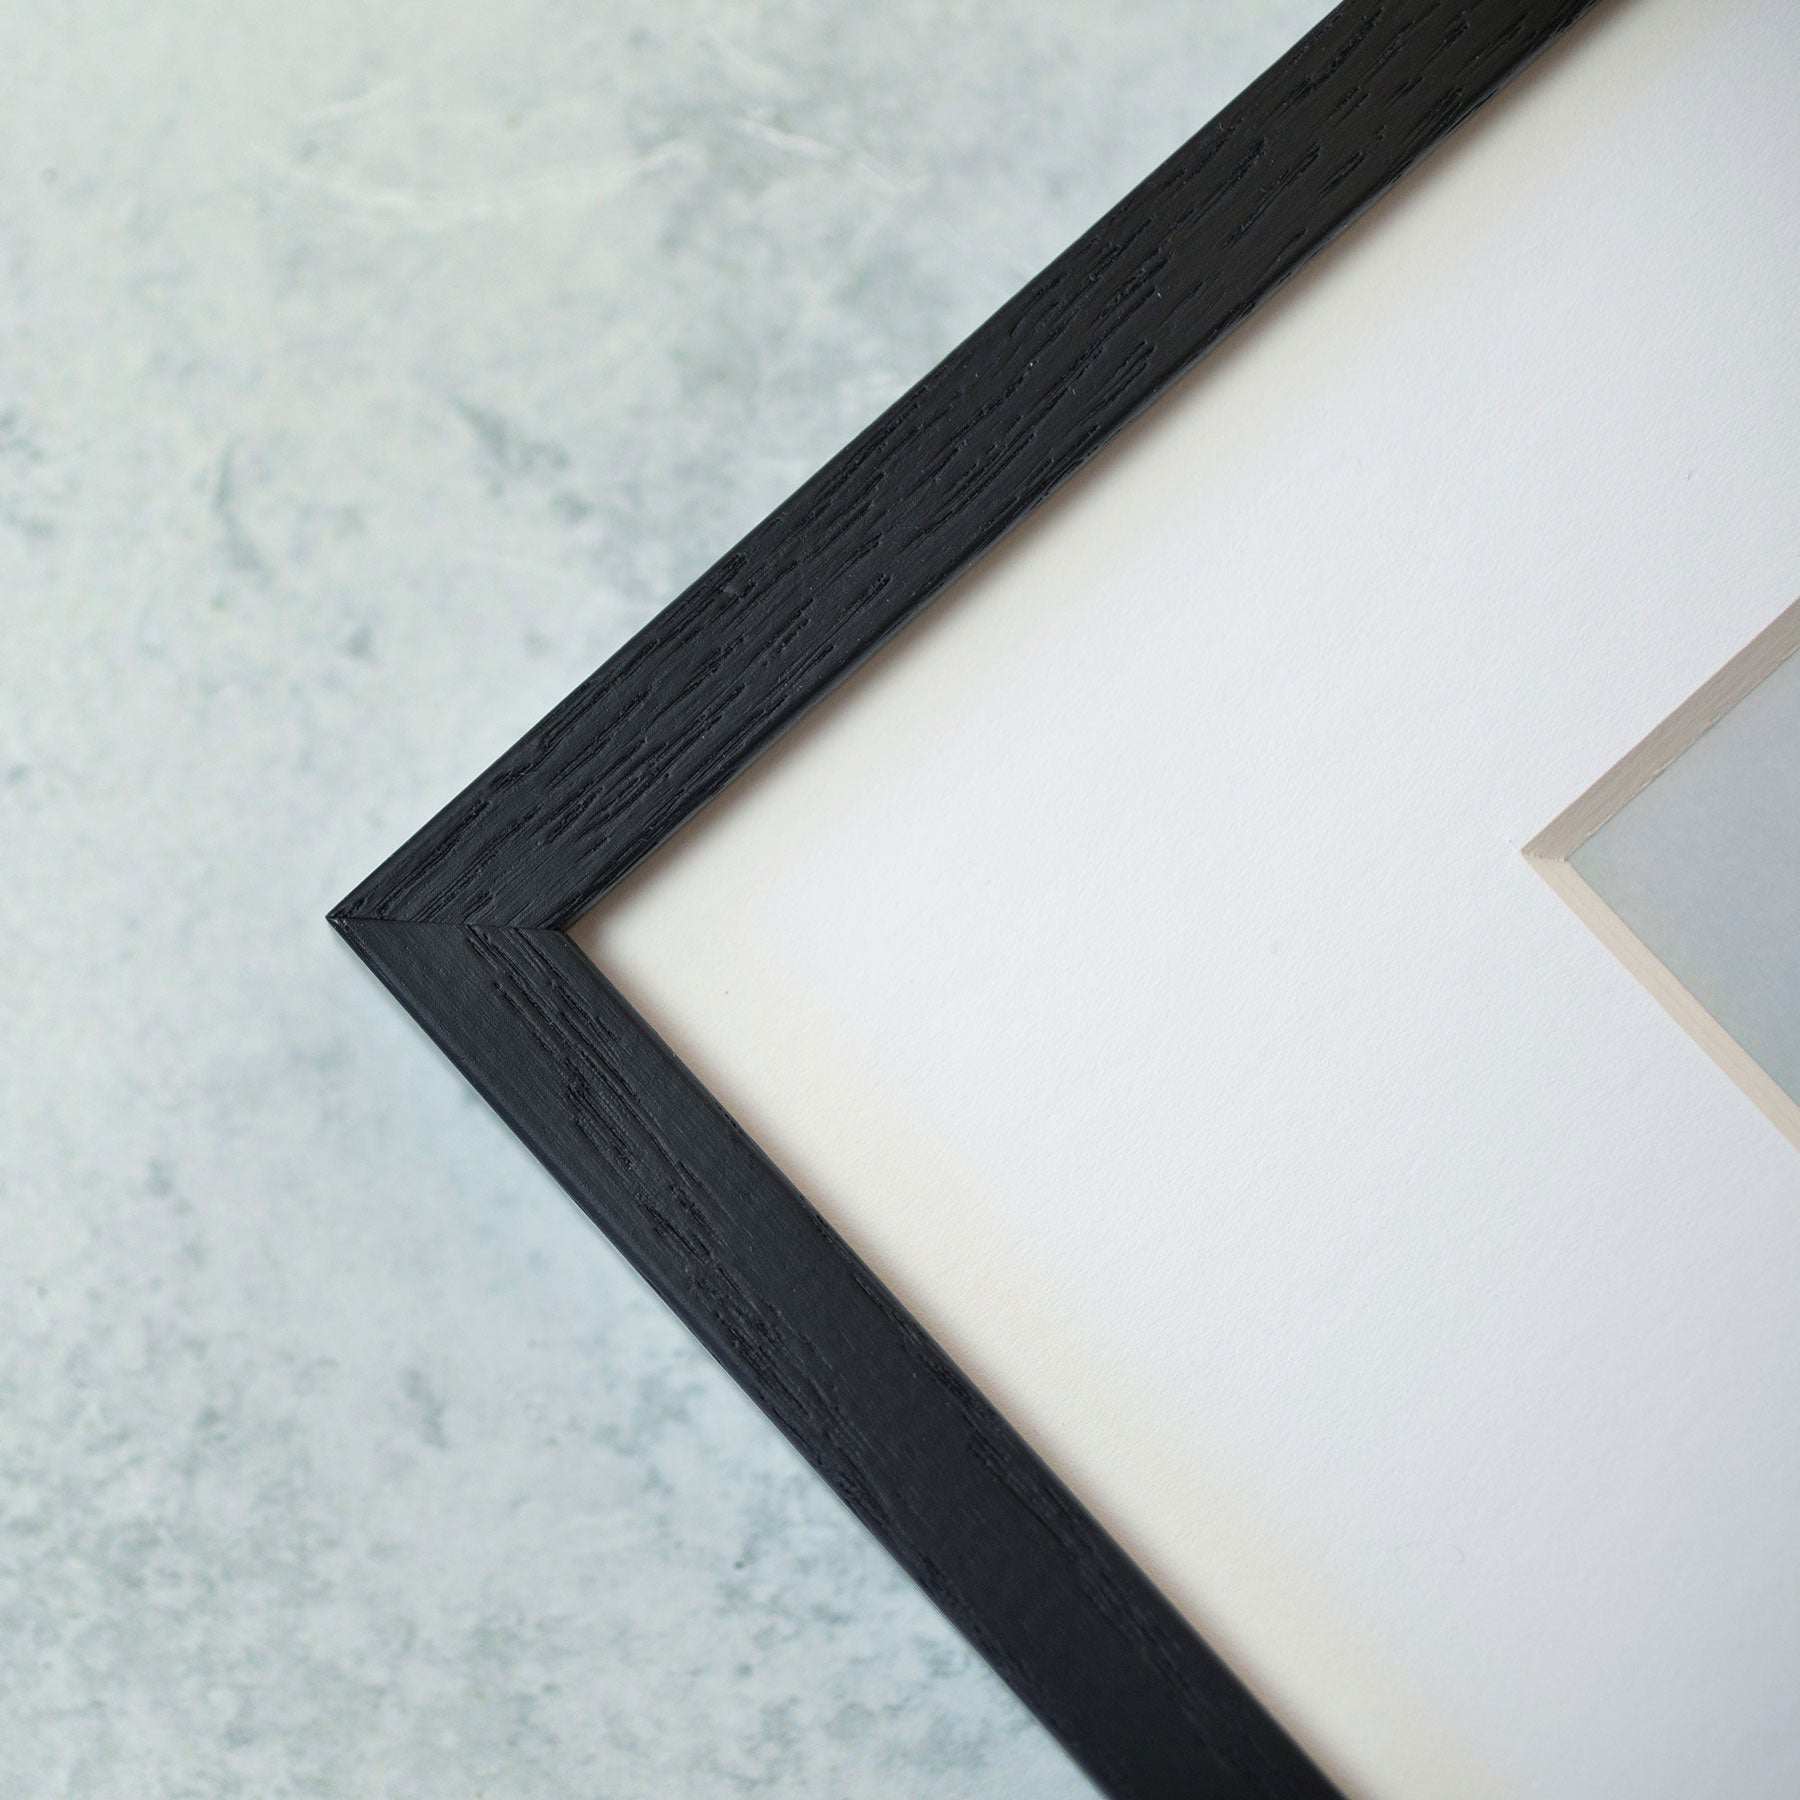 Close-up of a corner of a black wooden picture frame with a white mat, showcasing the Moody Nautical Seascape Print, &#39;Sail Boats Approaching&#39; by Offley Green. The partially visible image edge hints at intricate details. The background surface appears to be a light, textured material.